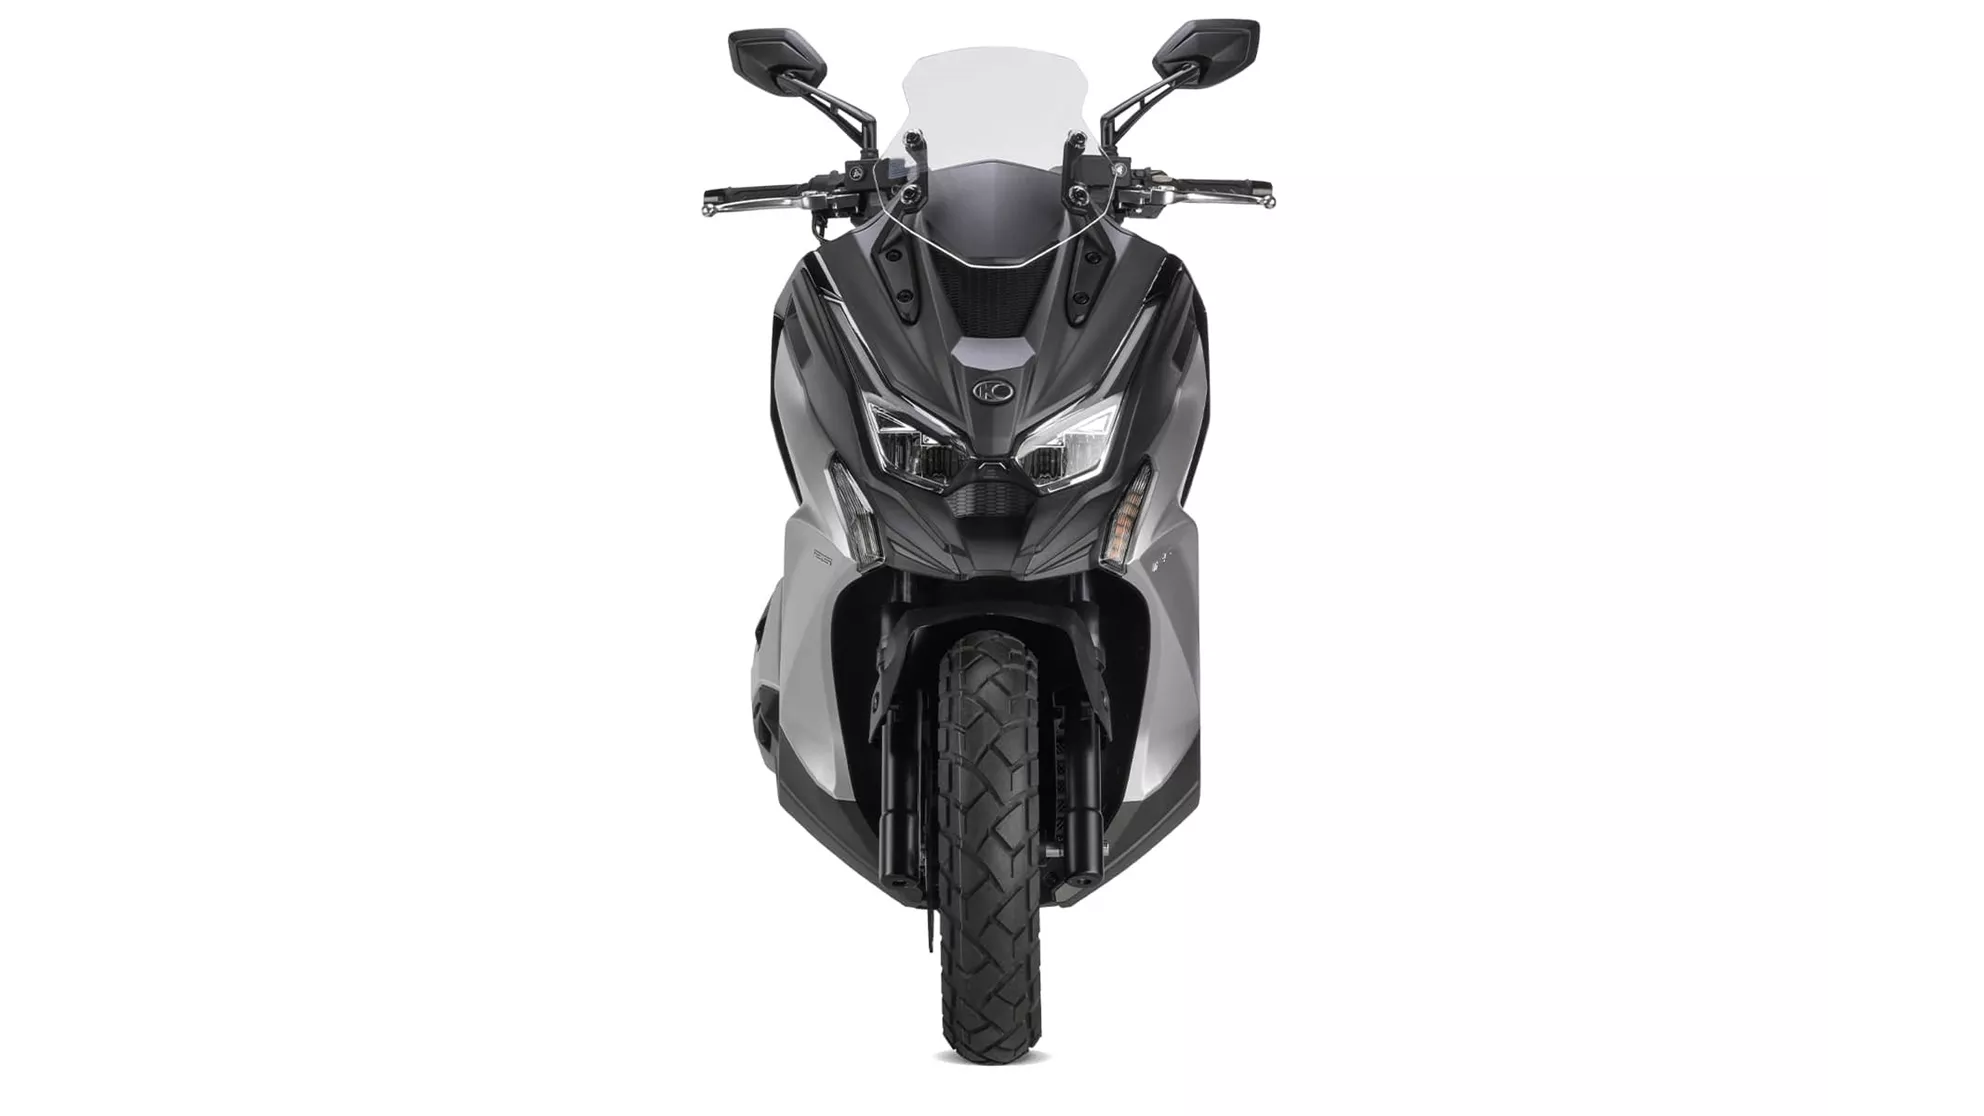 Kymco DT X 125i ABS - Image 1